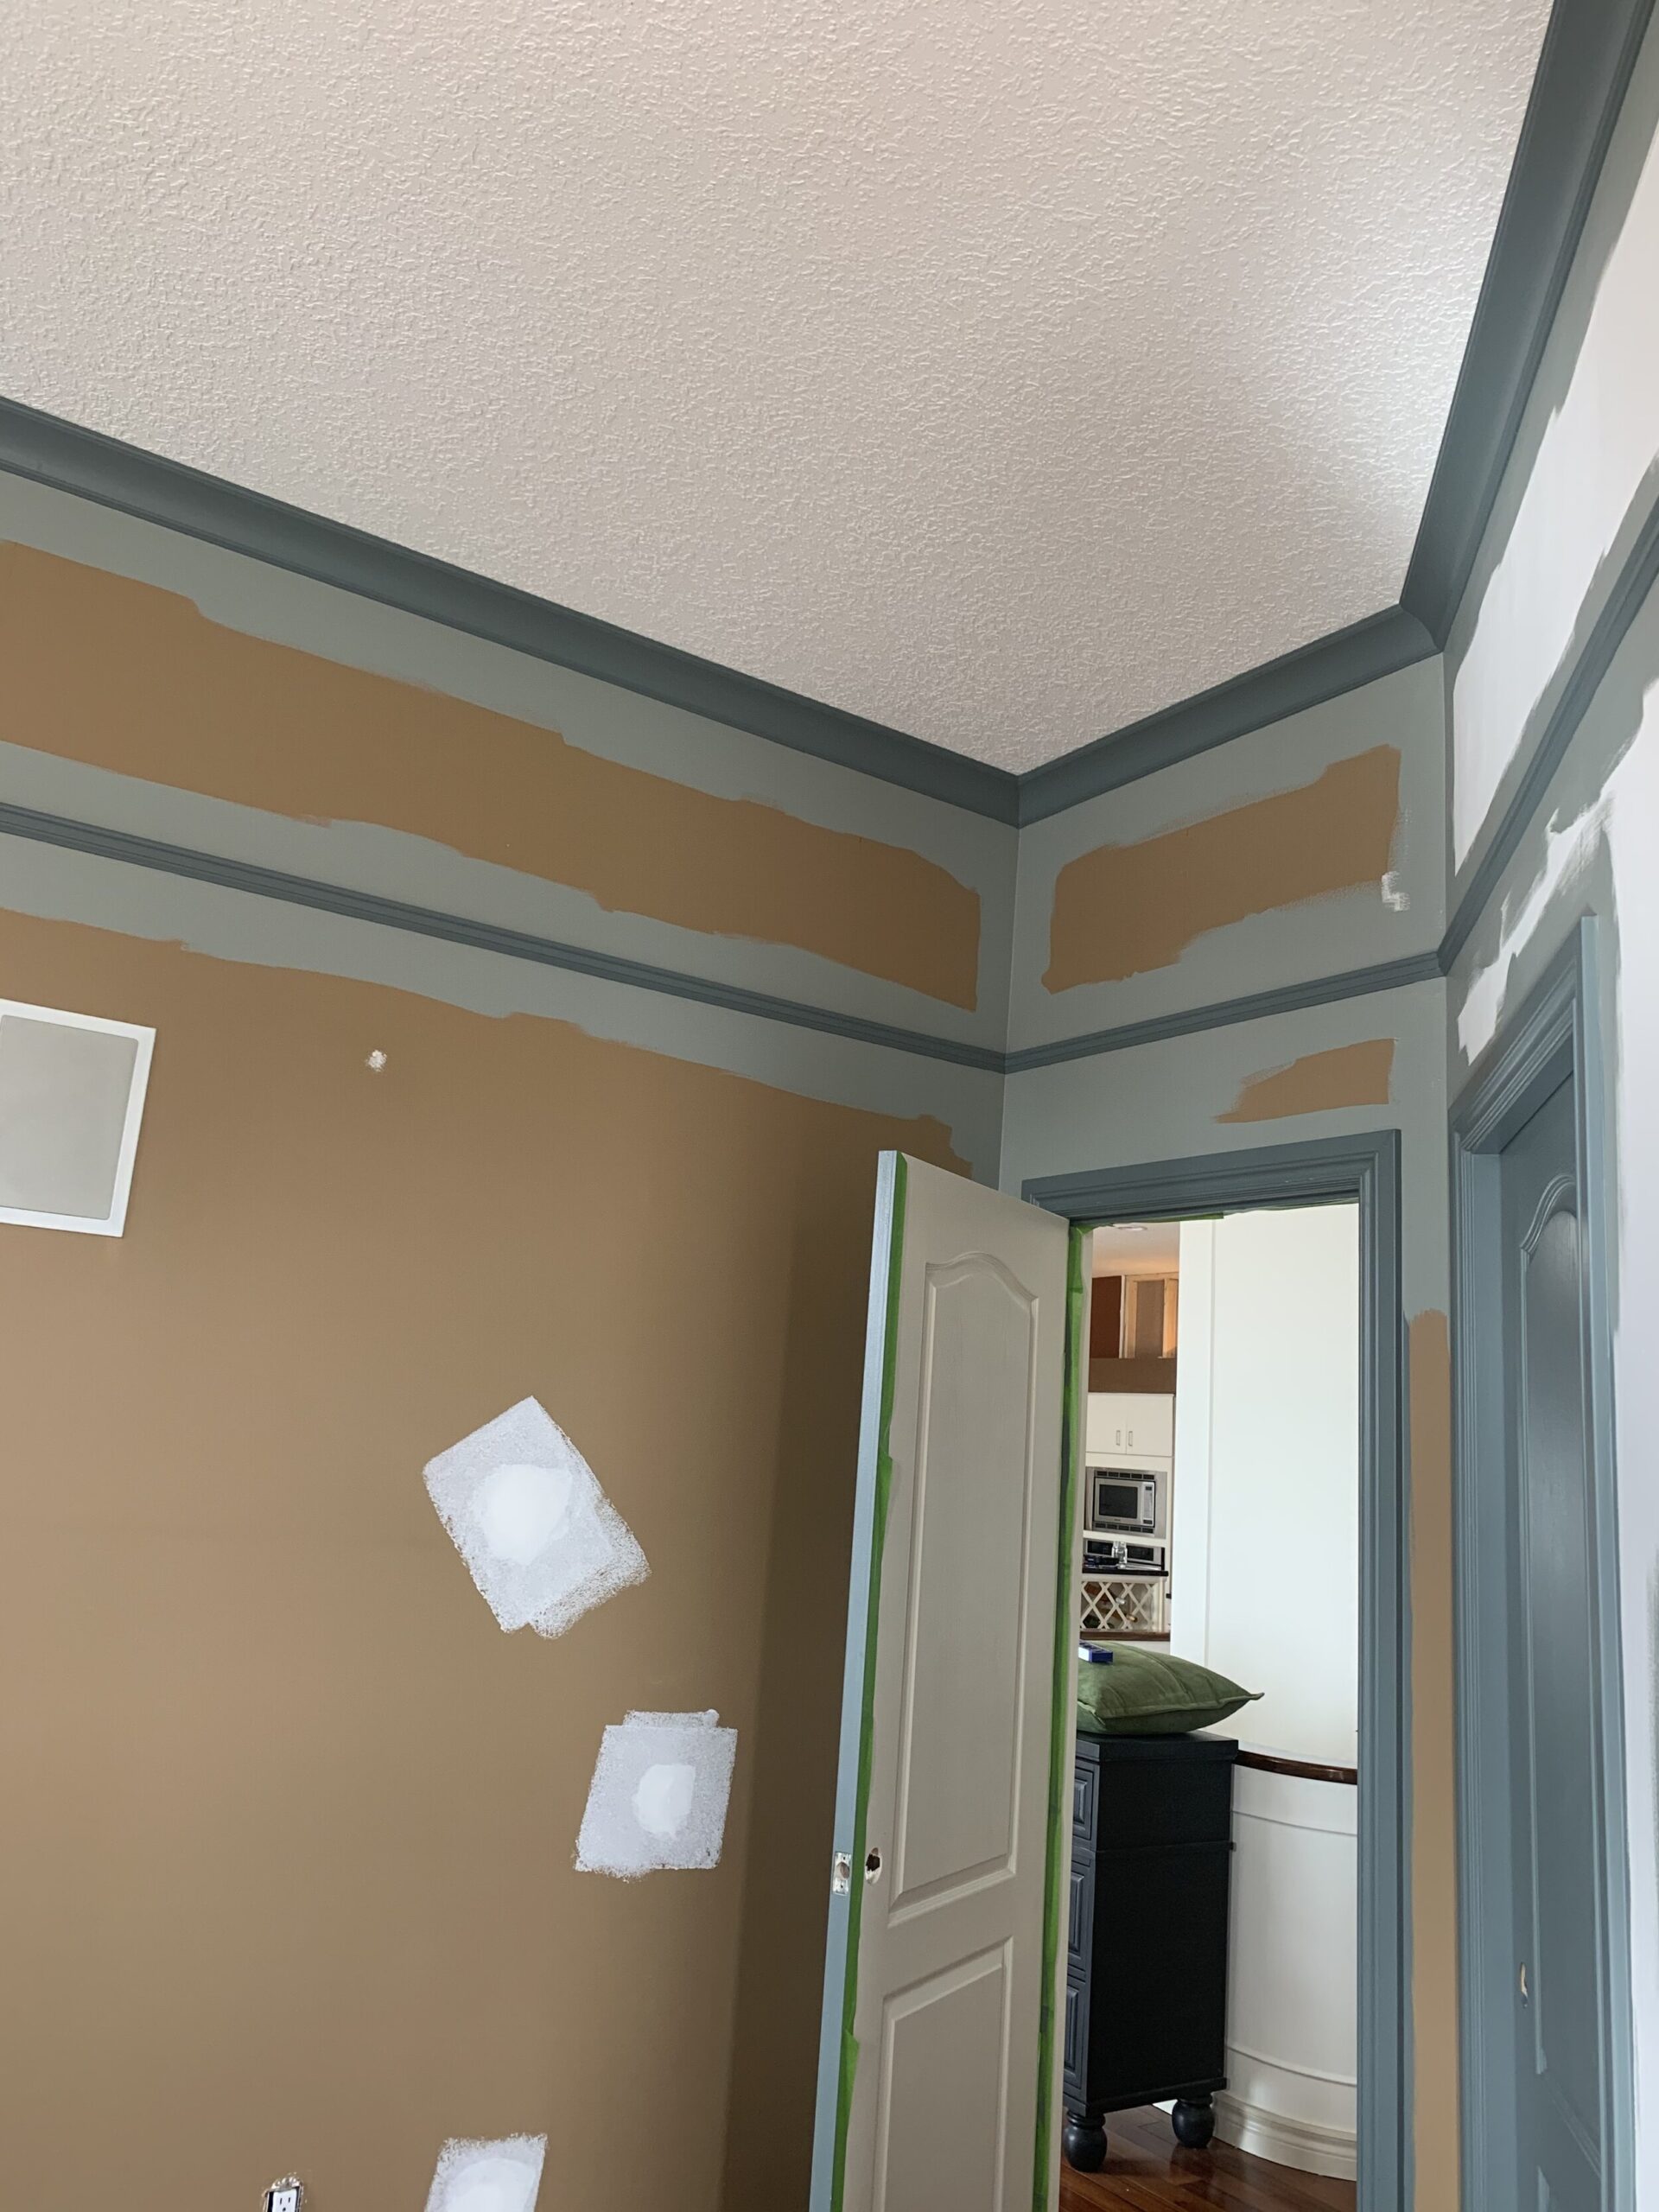 brown walls partially painted with green trim and edges cut in with green paint